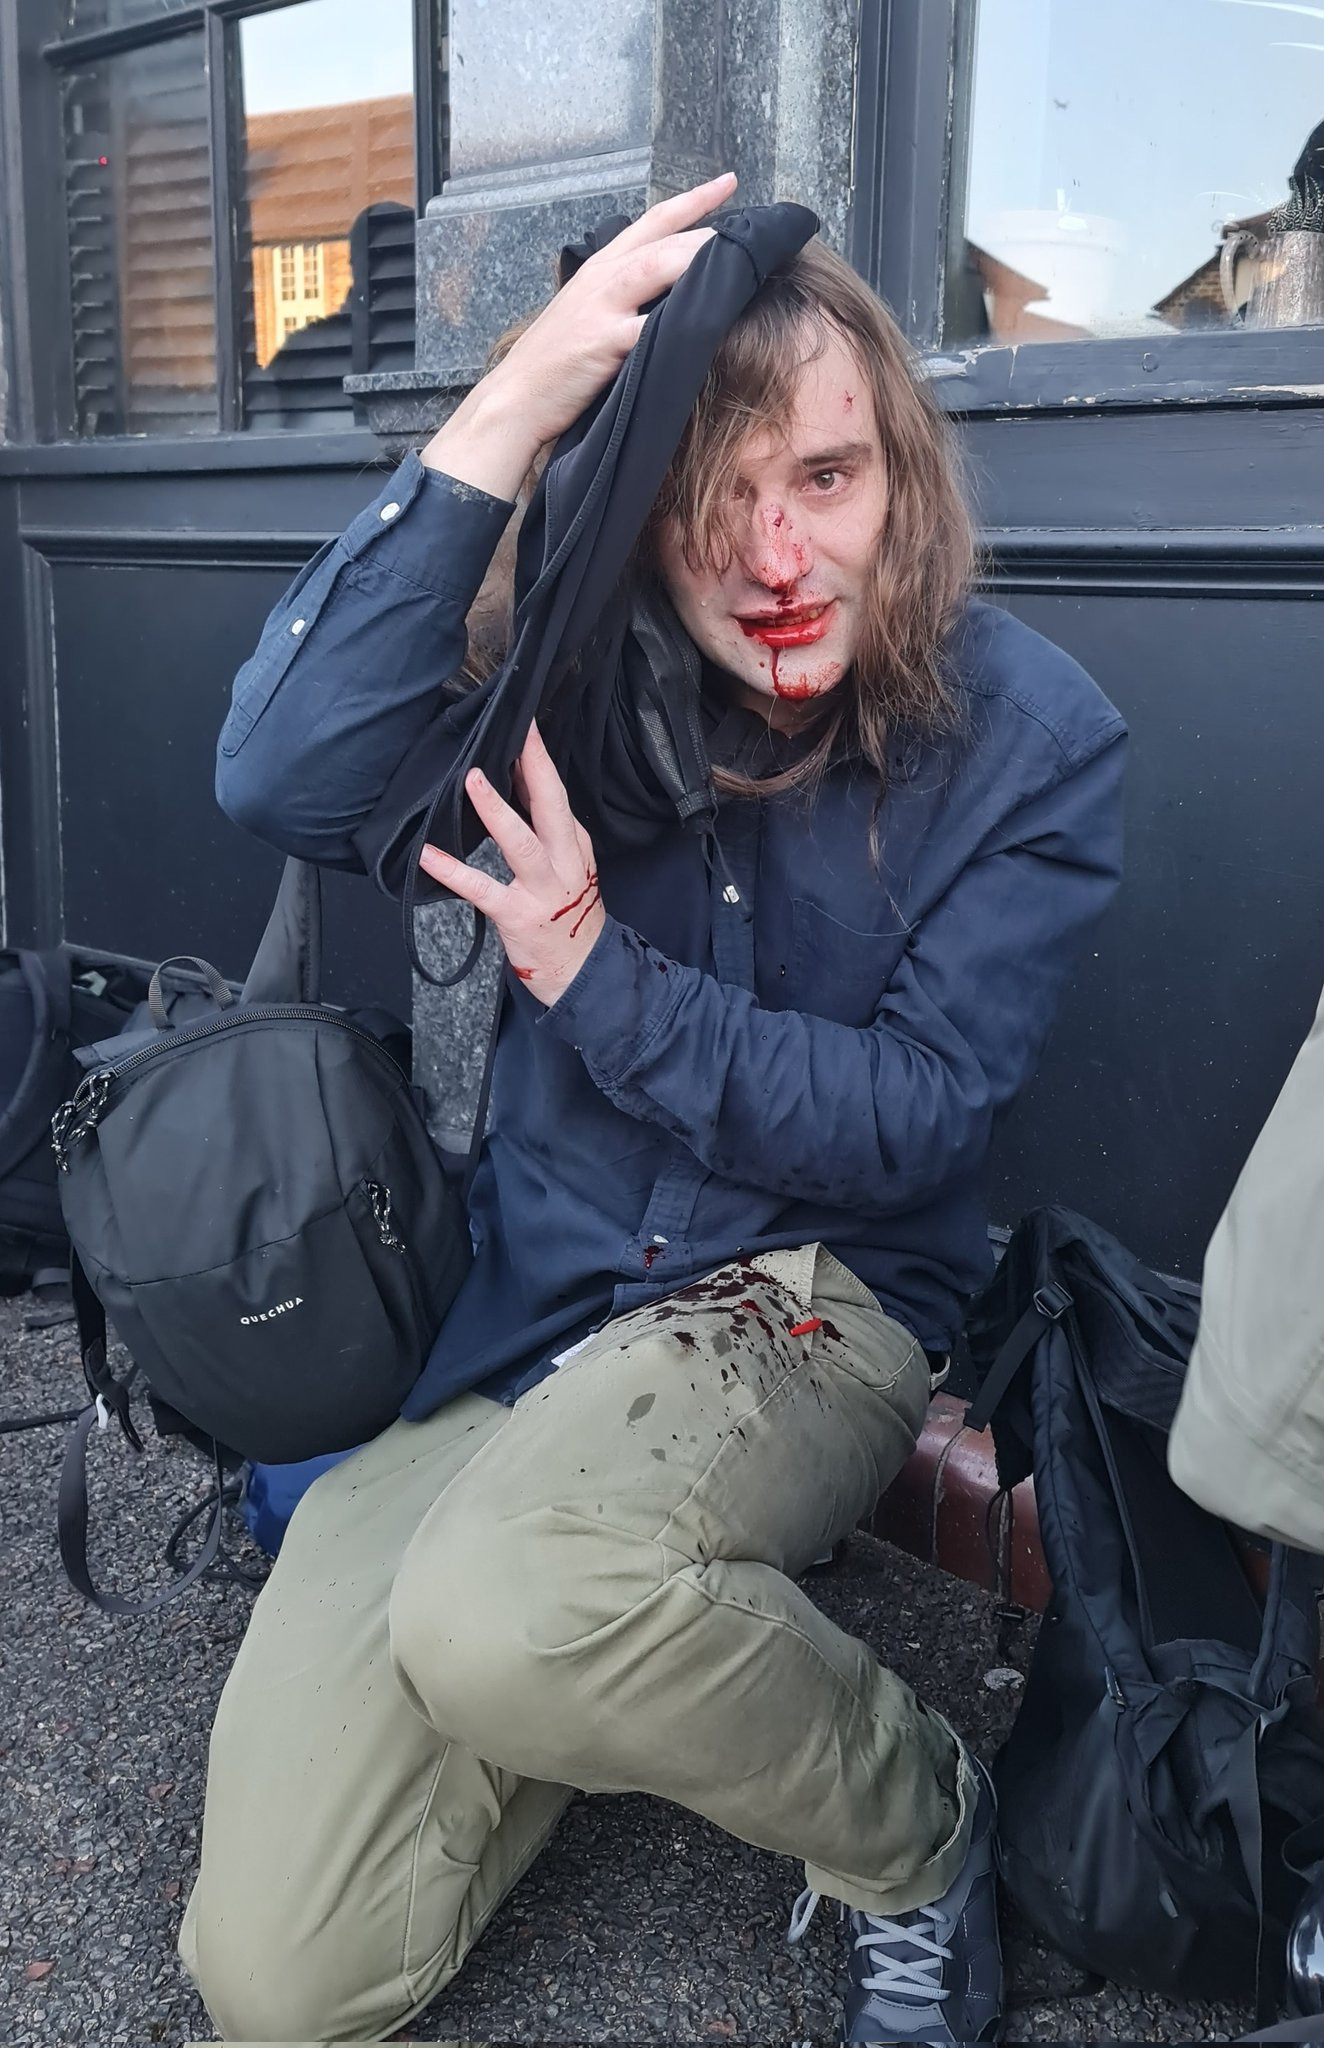 South London activist Ada Cable crouched down, holding a piece of clothing on her head. Blood is streaming down her nose and from her mouth onto her trousers.